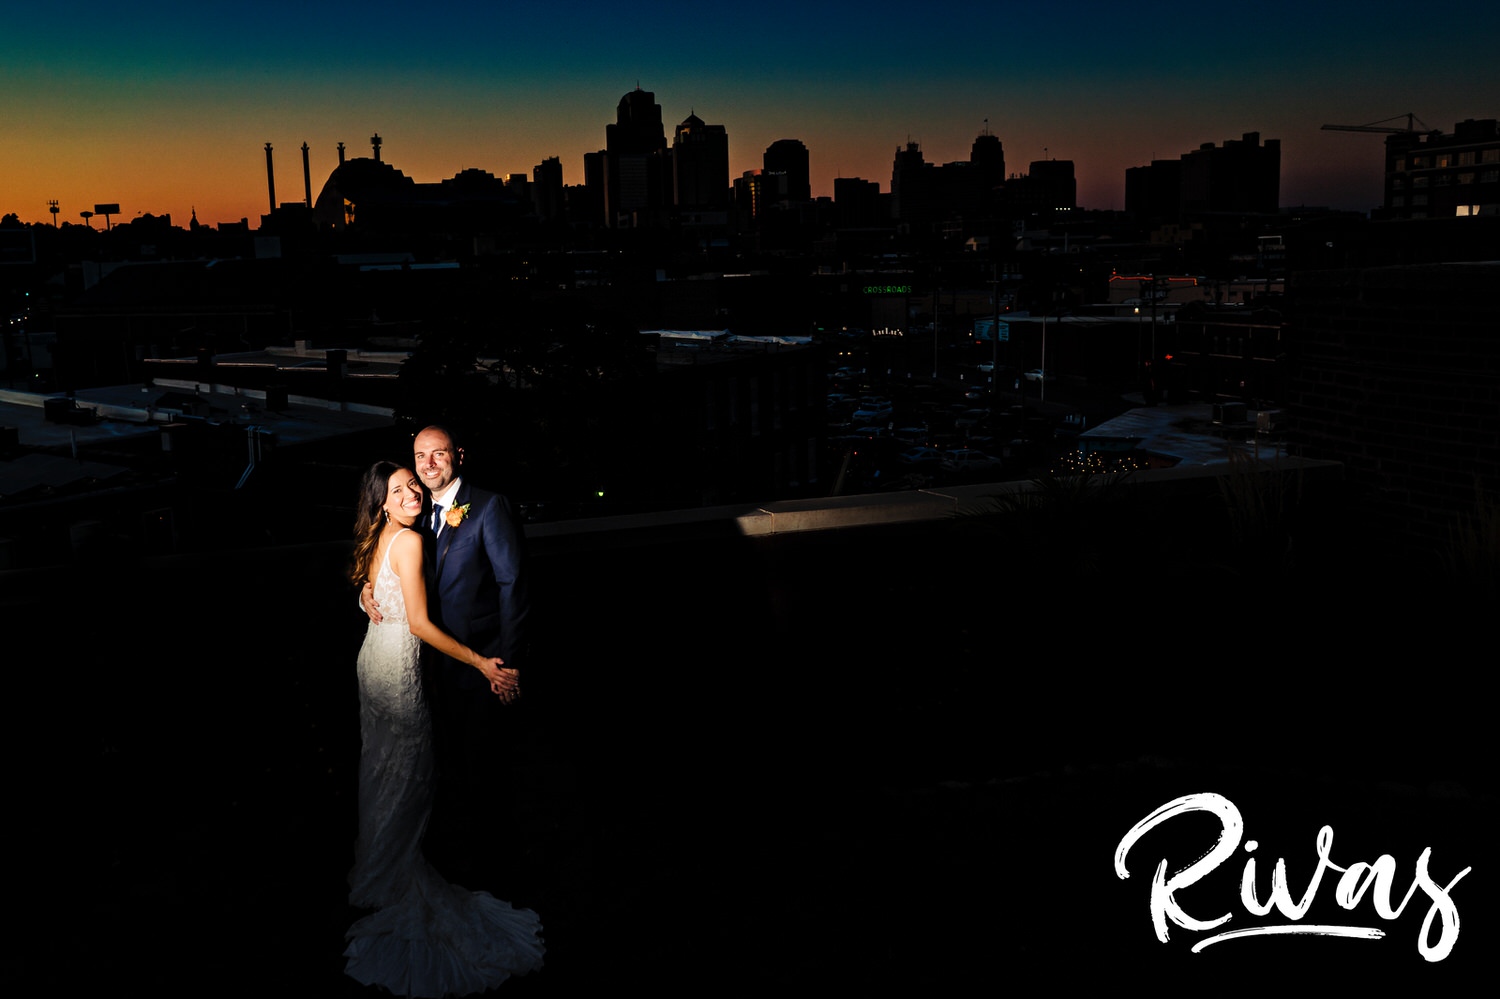 A vibrant portrait of a bride and groom in front of the Kansas City skyline at sunset during their wedding reception. 